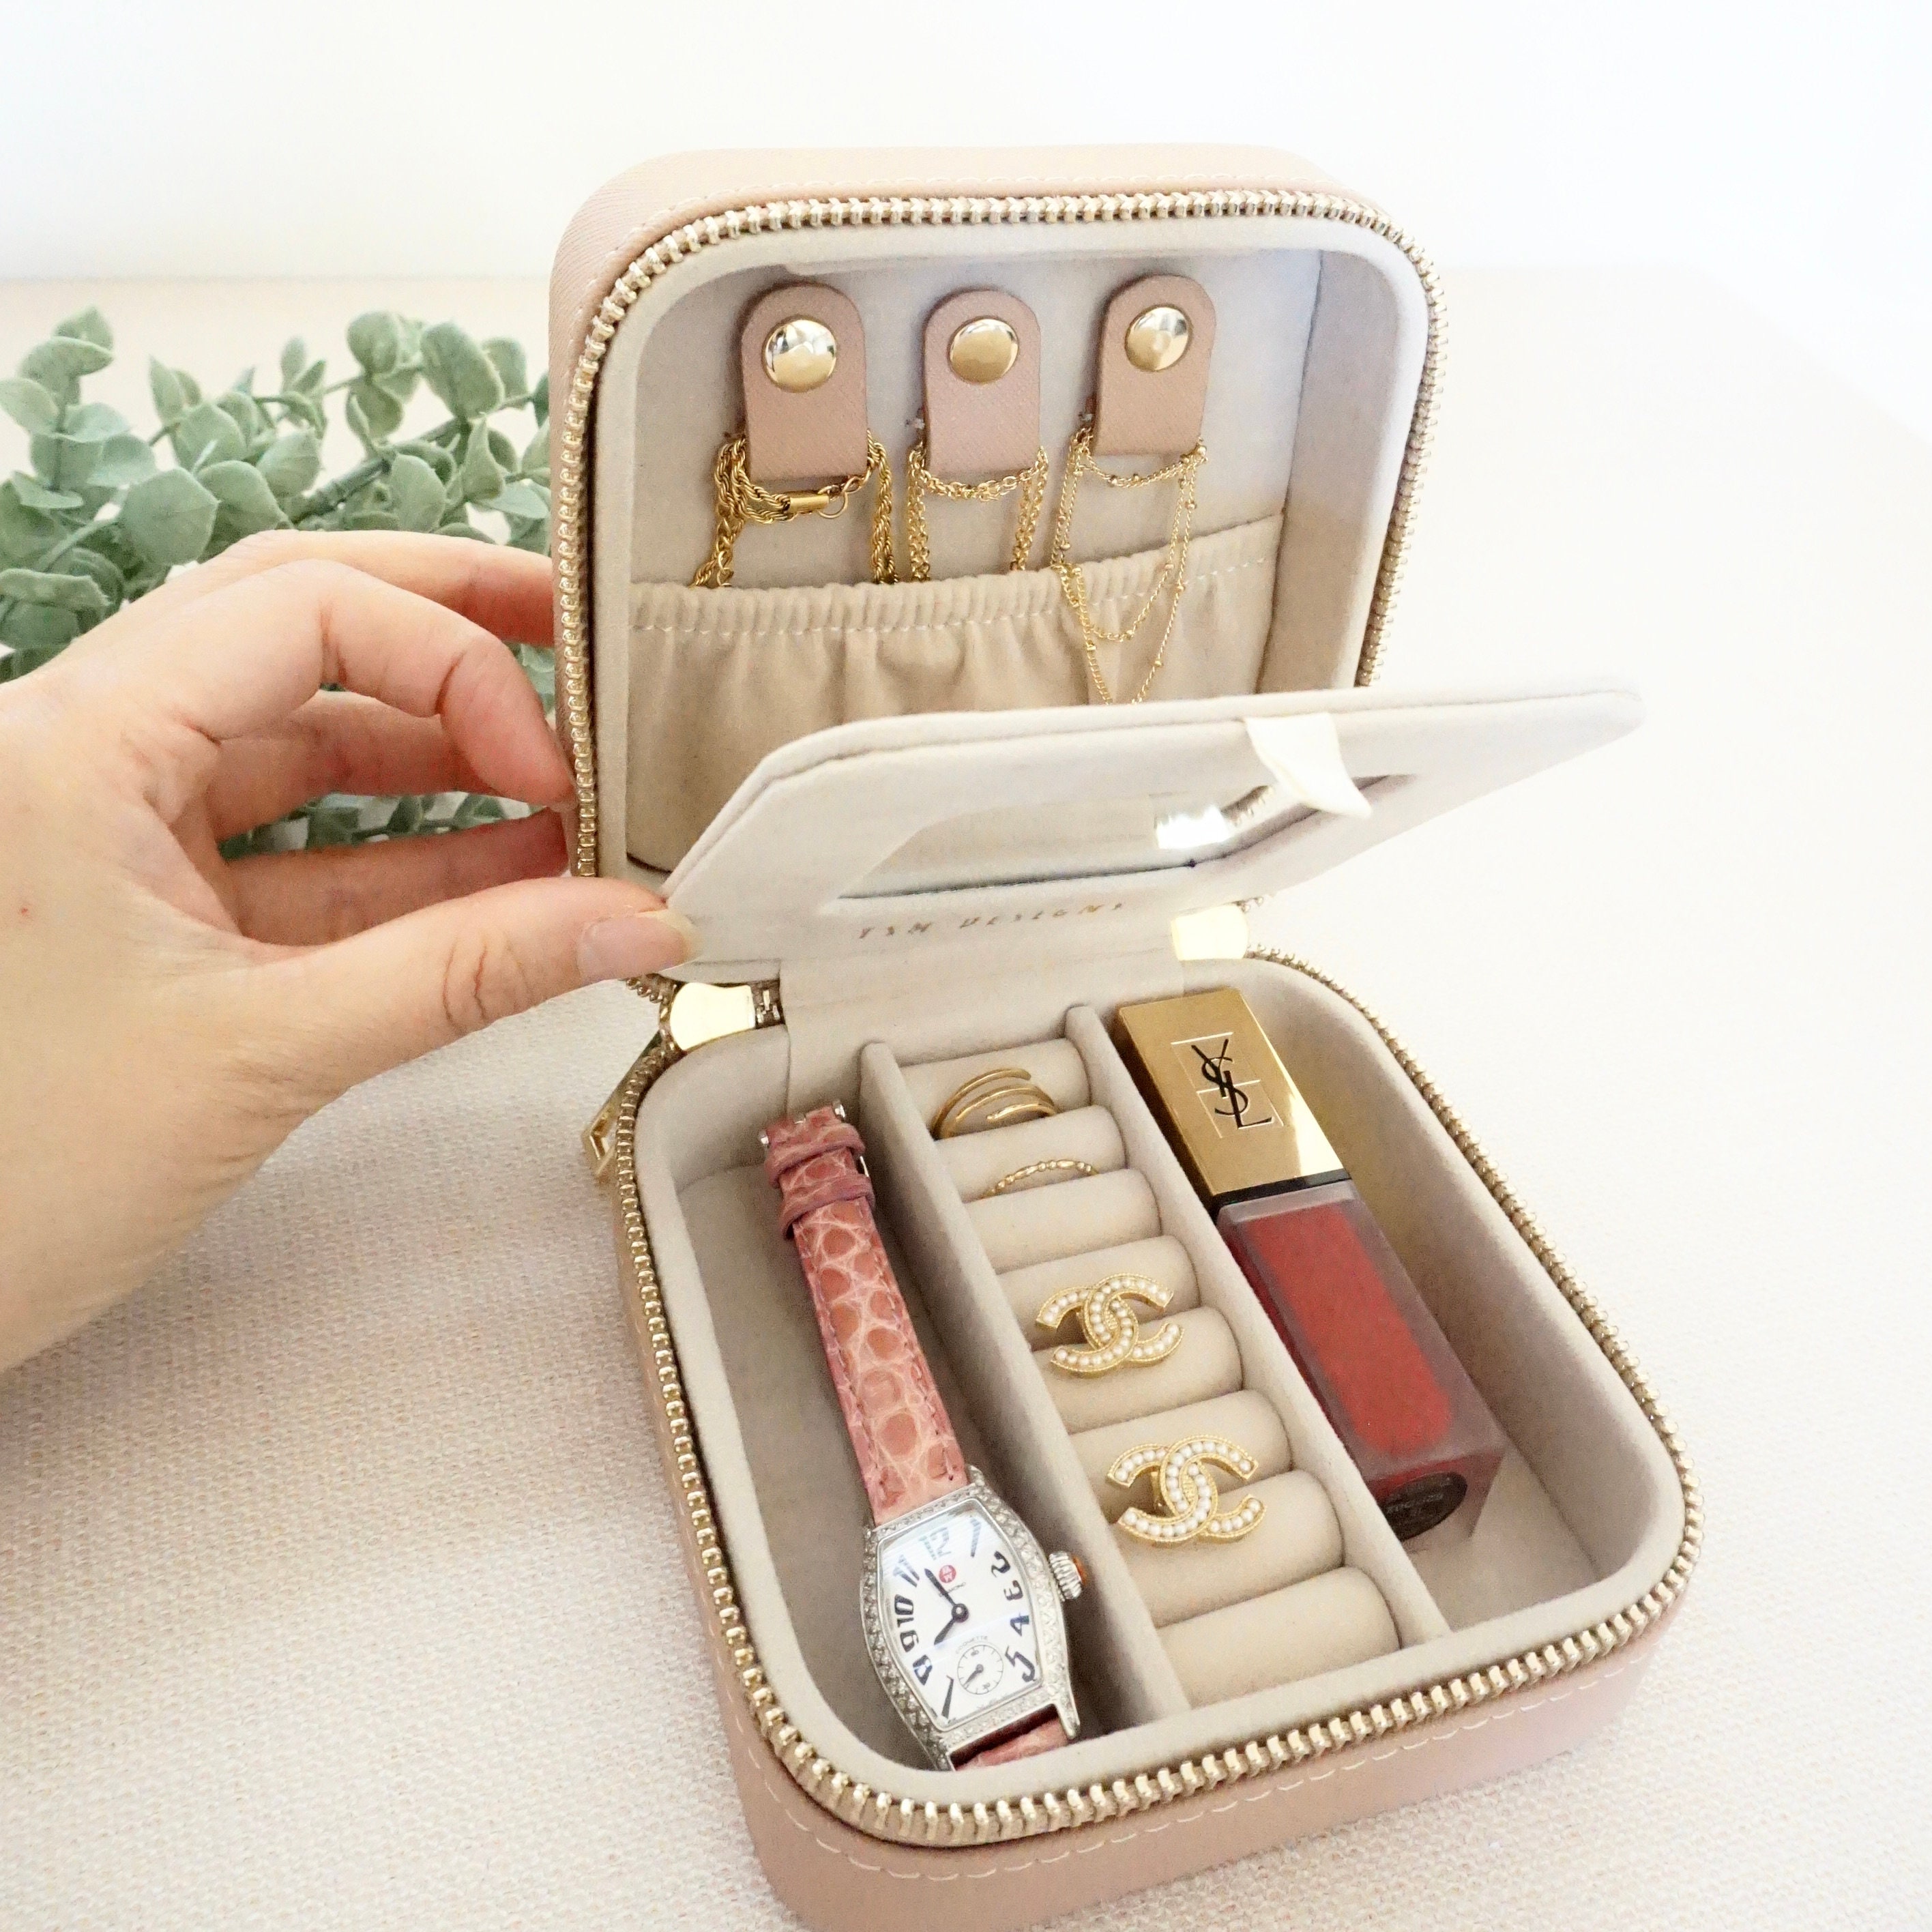 EverGlimp Small Travel Jewelry Case For Women